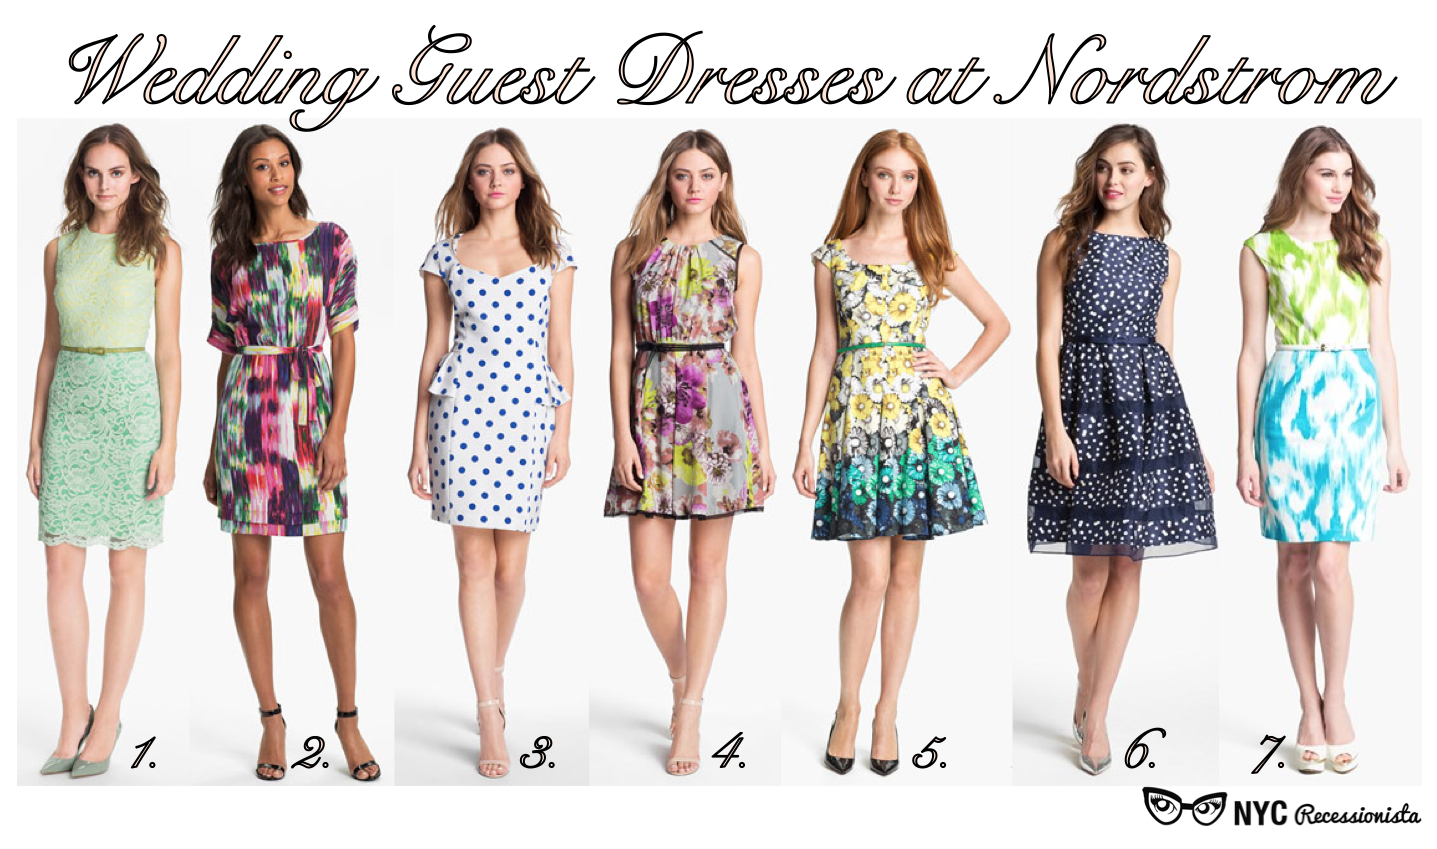  Wedding Guest Dresses at Nordstrom  NYC Recessionista